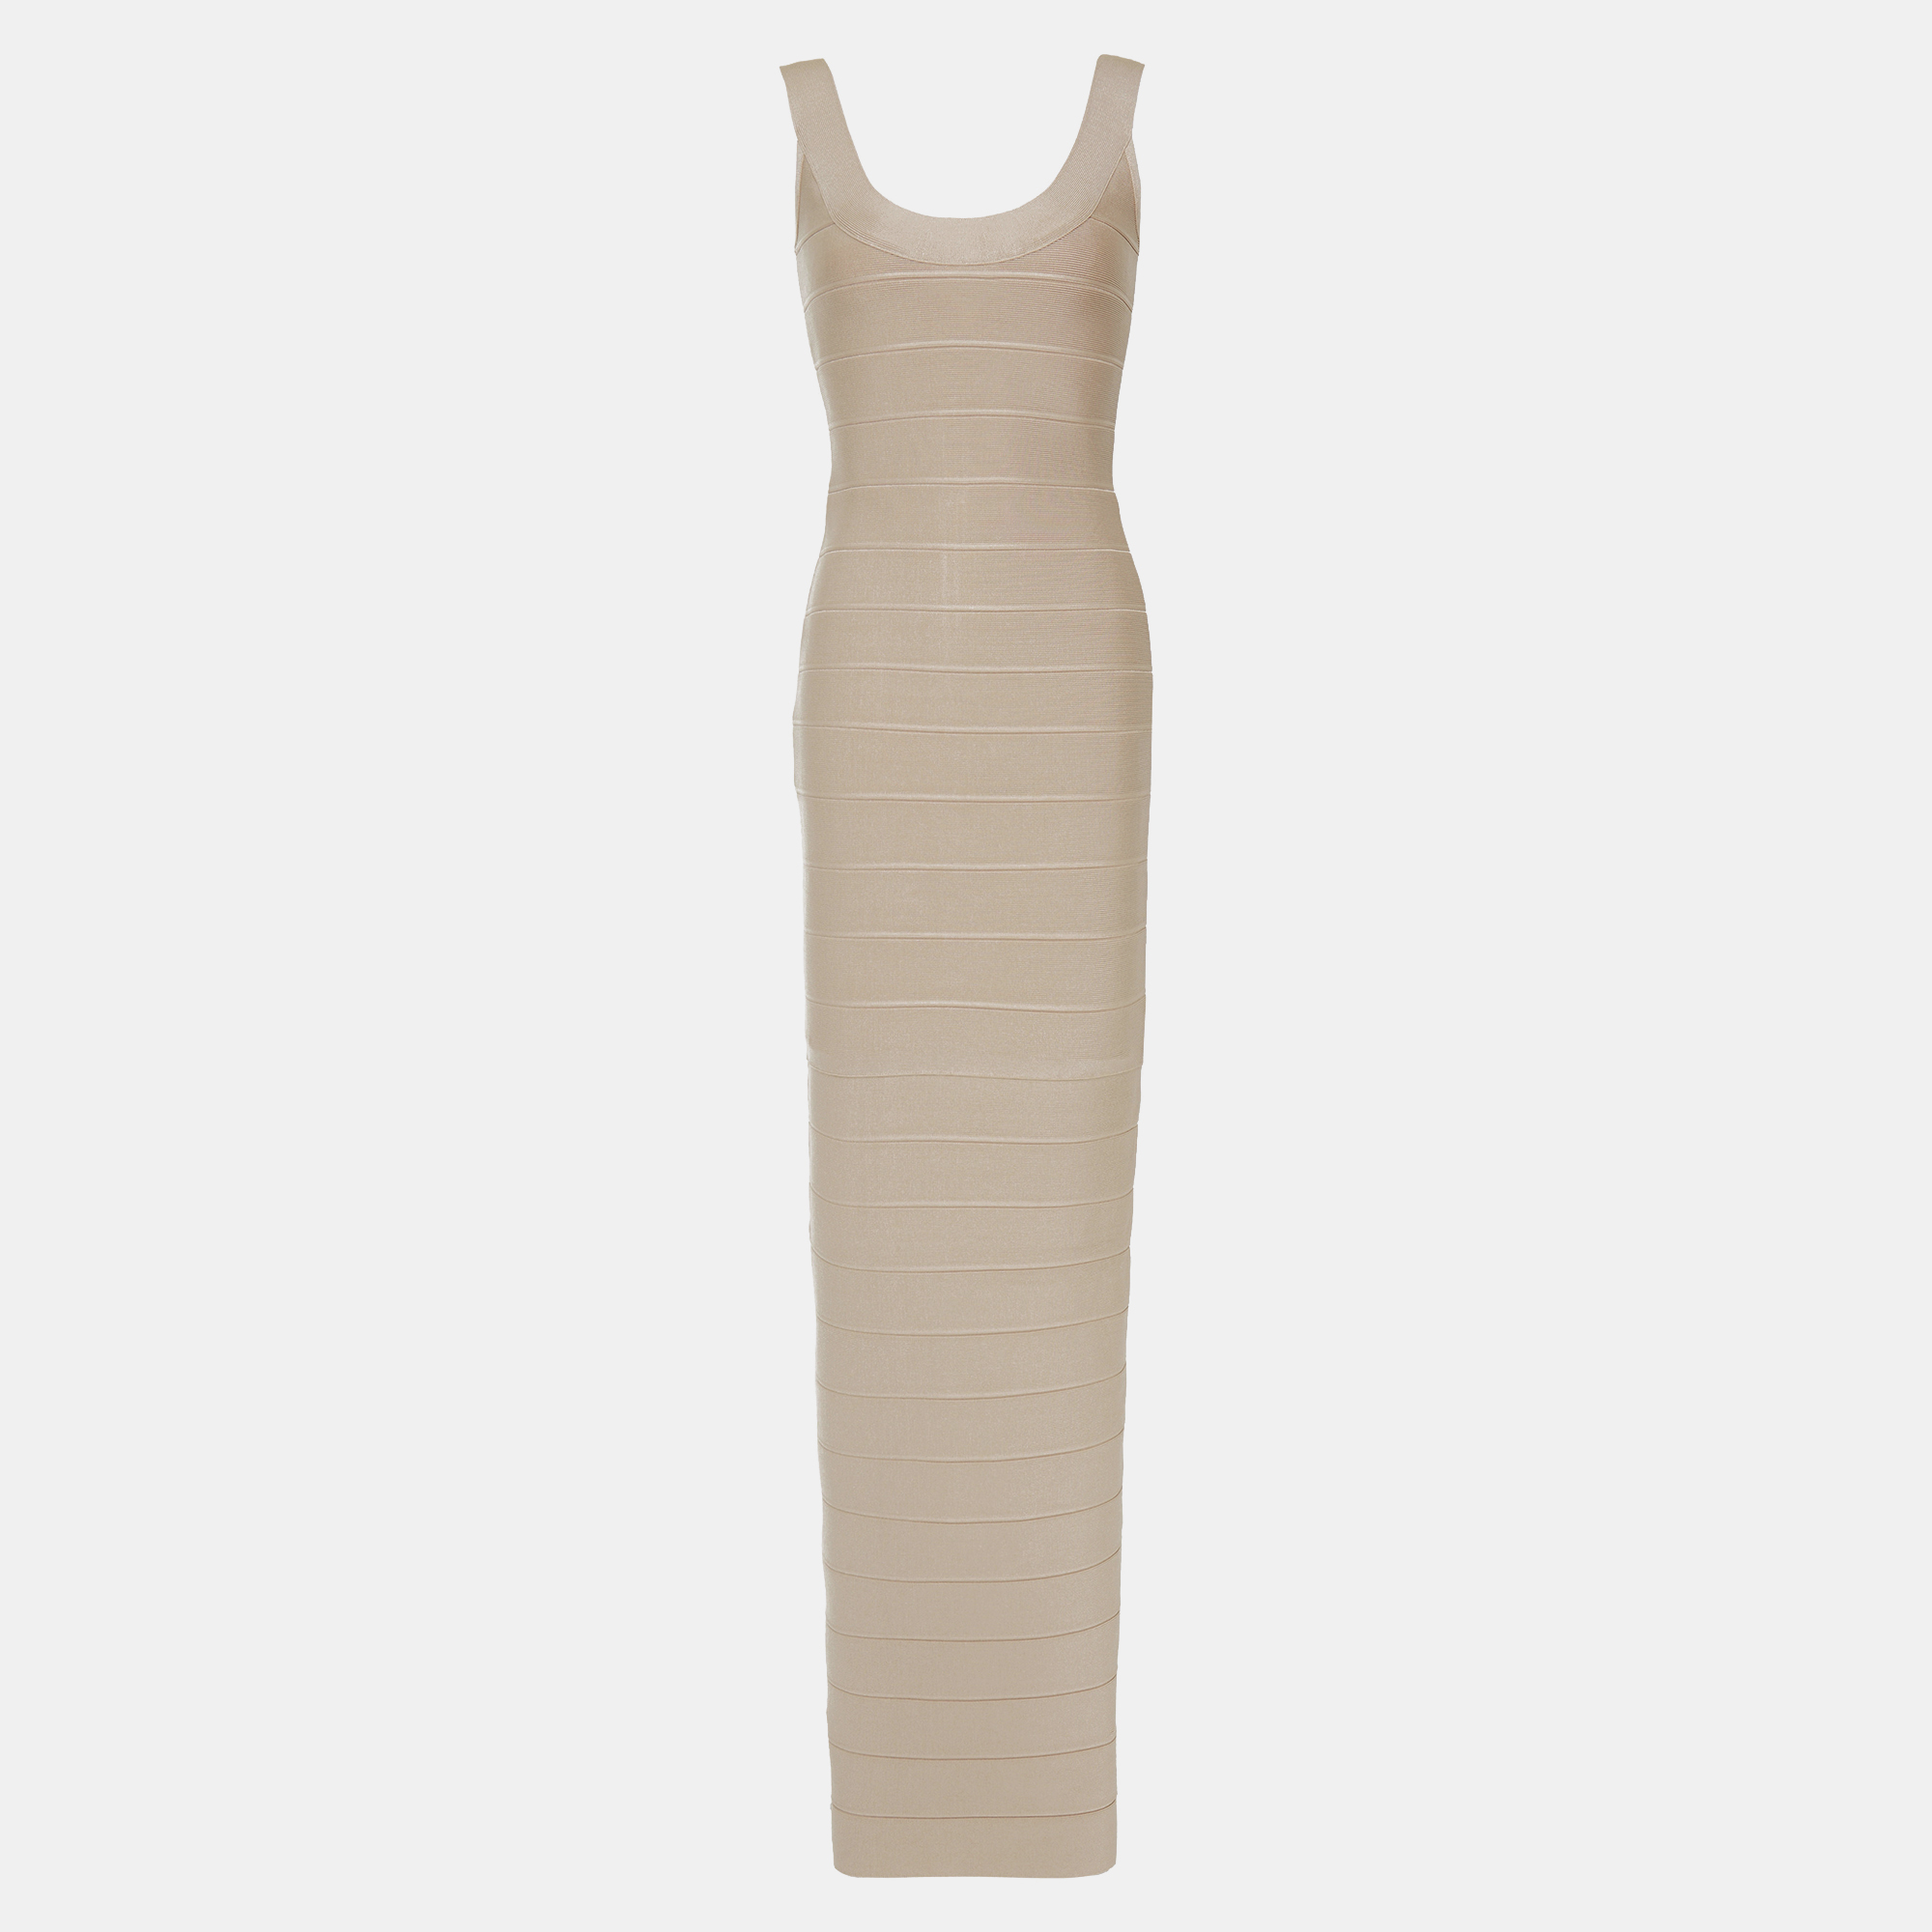 Herve leger rayon gown s